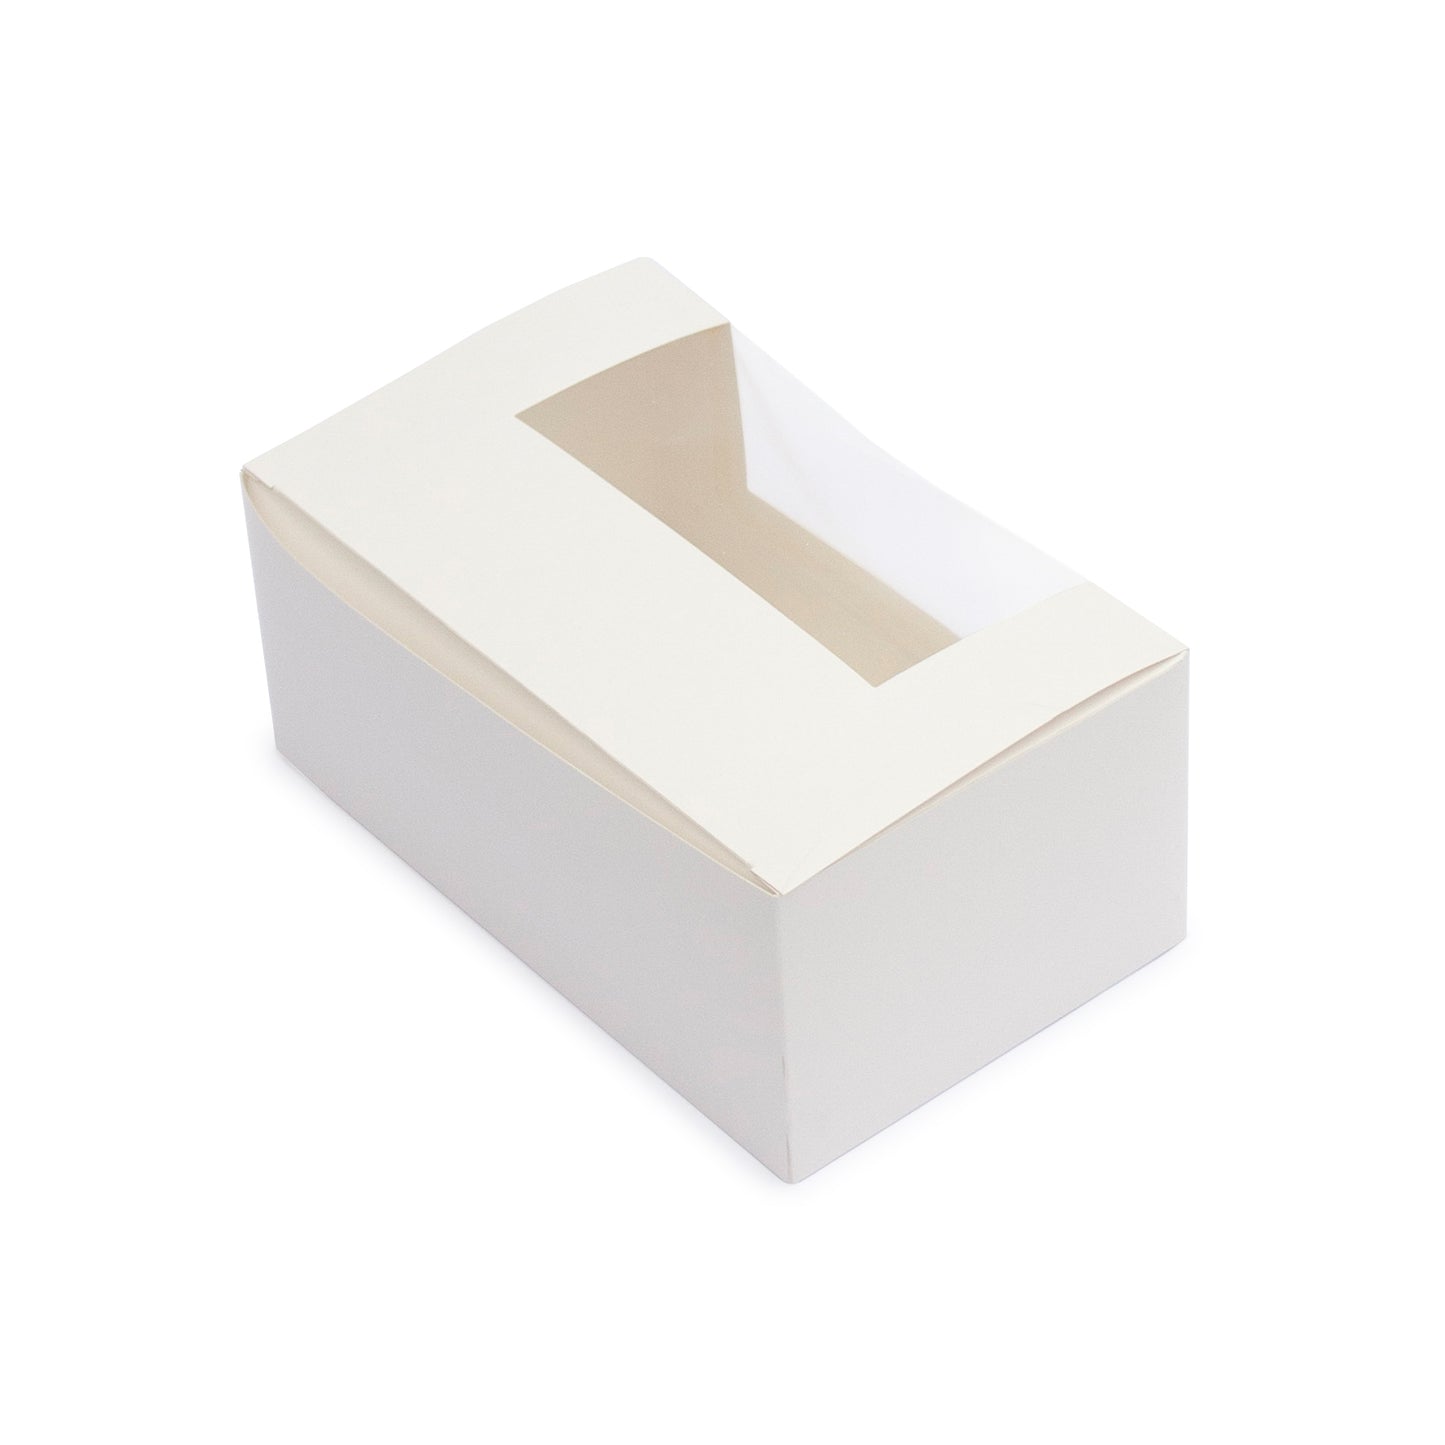 Cupcake 2 boxes 179x110x80mm (Compostable PLA window)